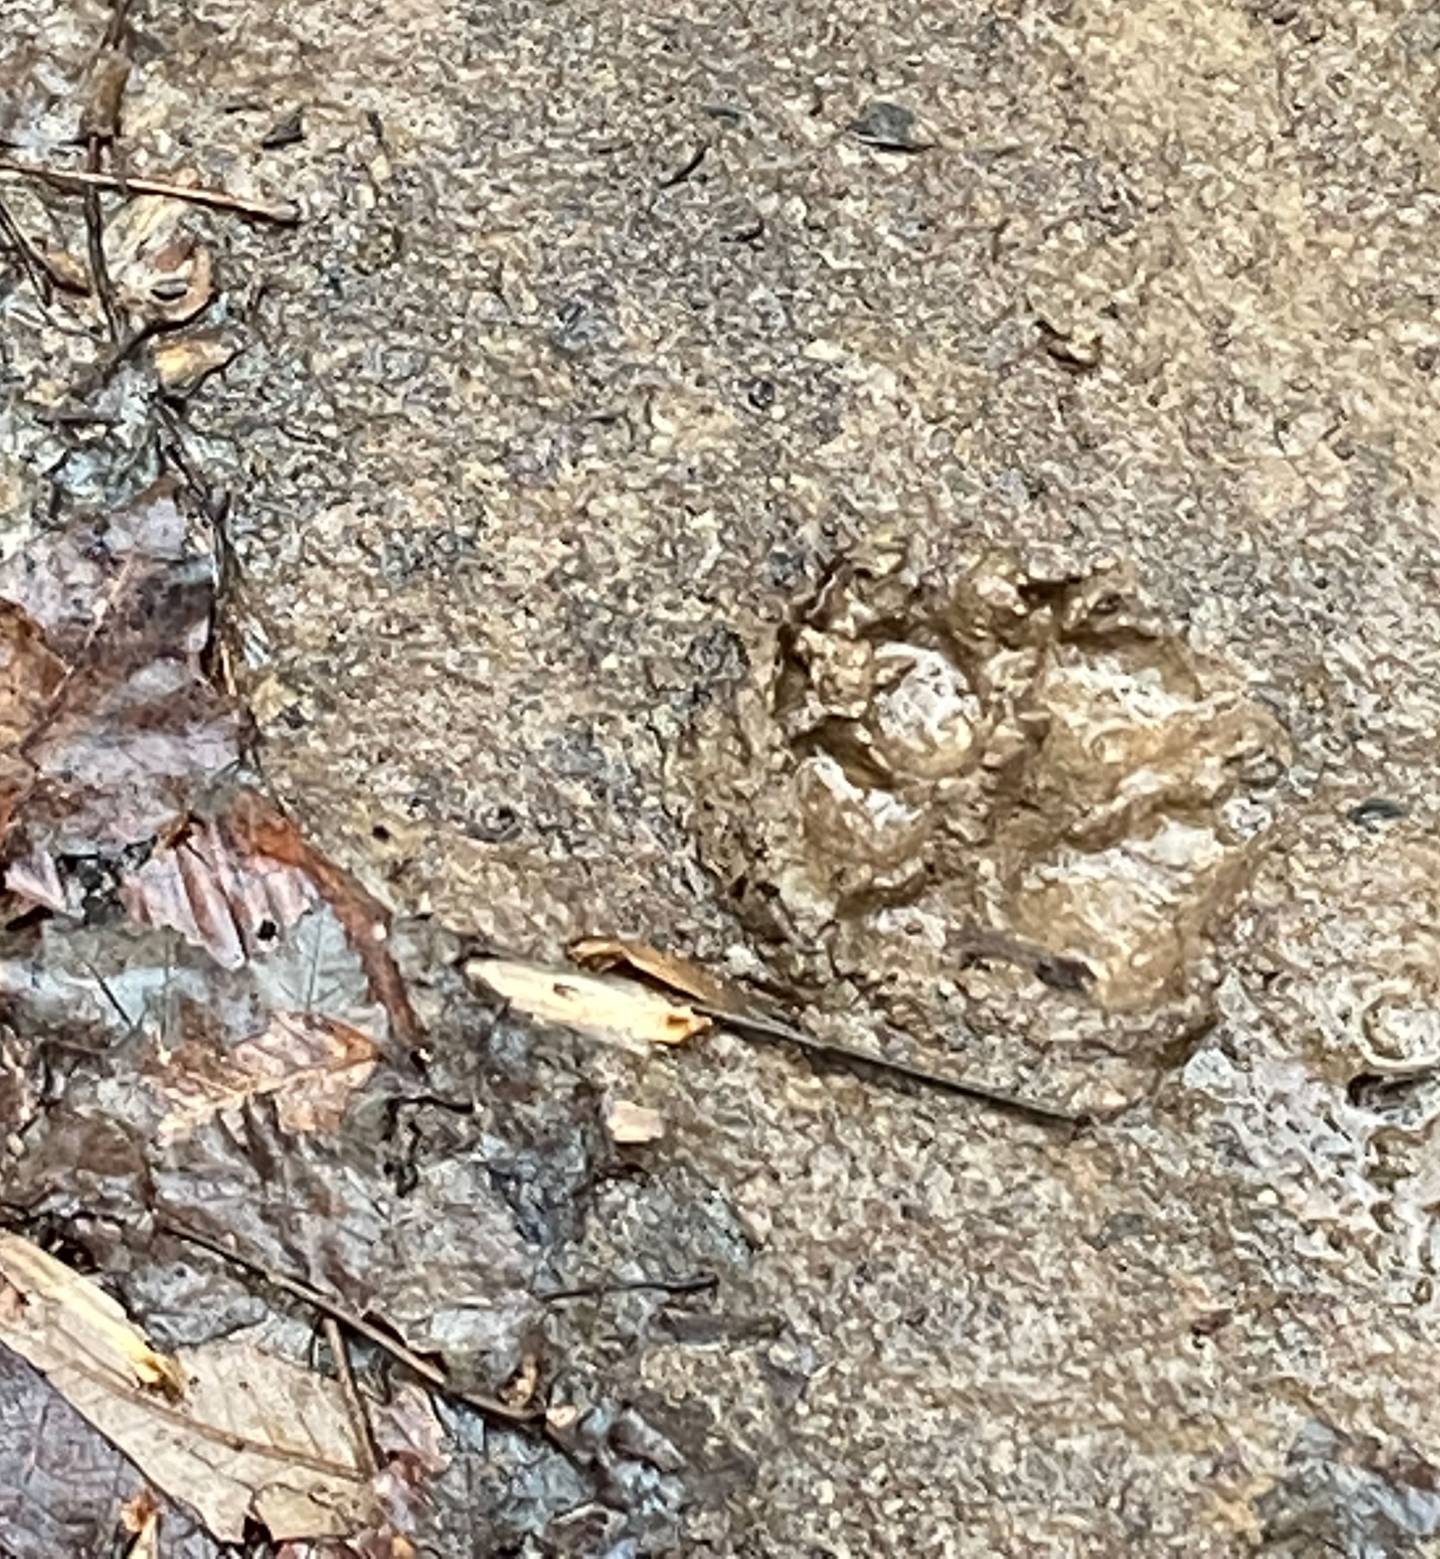 a dog's print in the mud